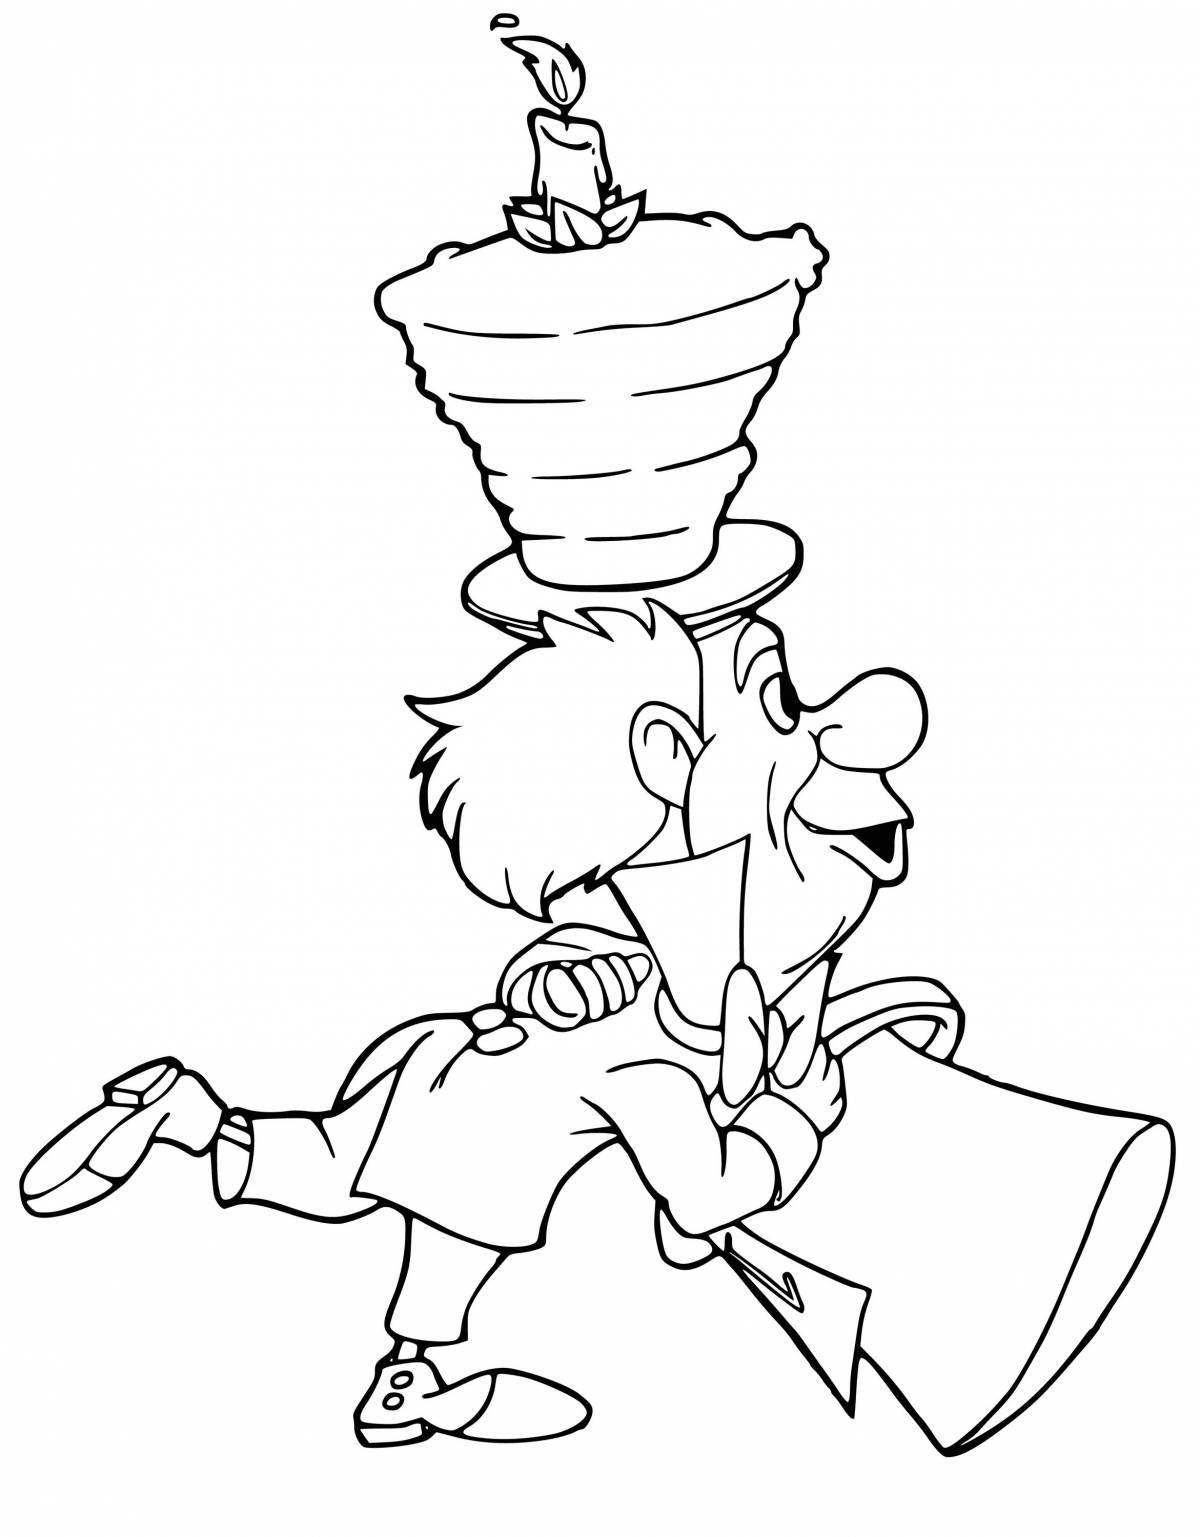 Merry Hatter coloring page